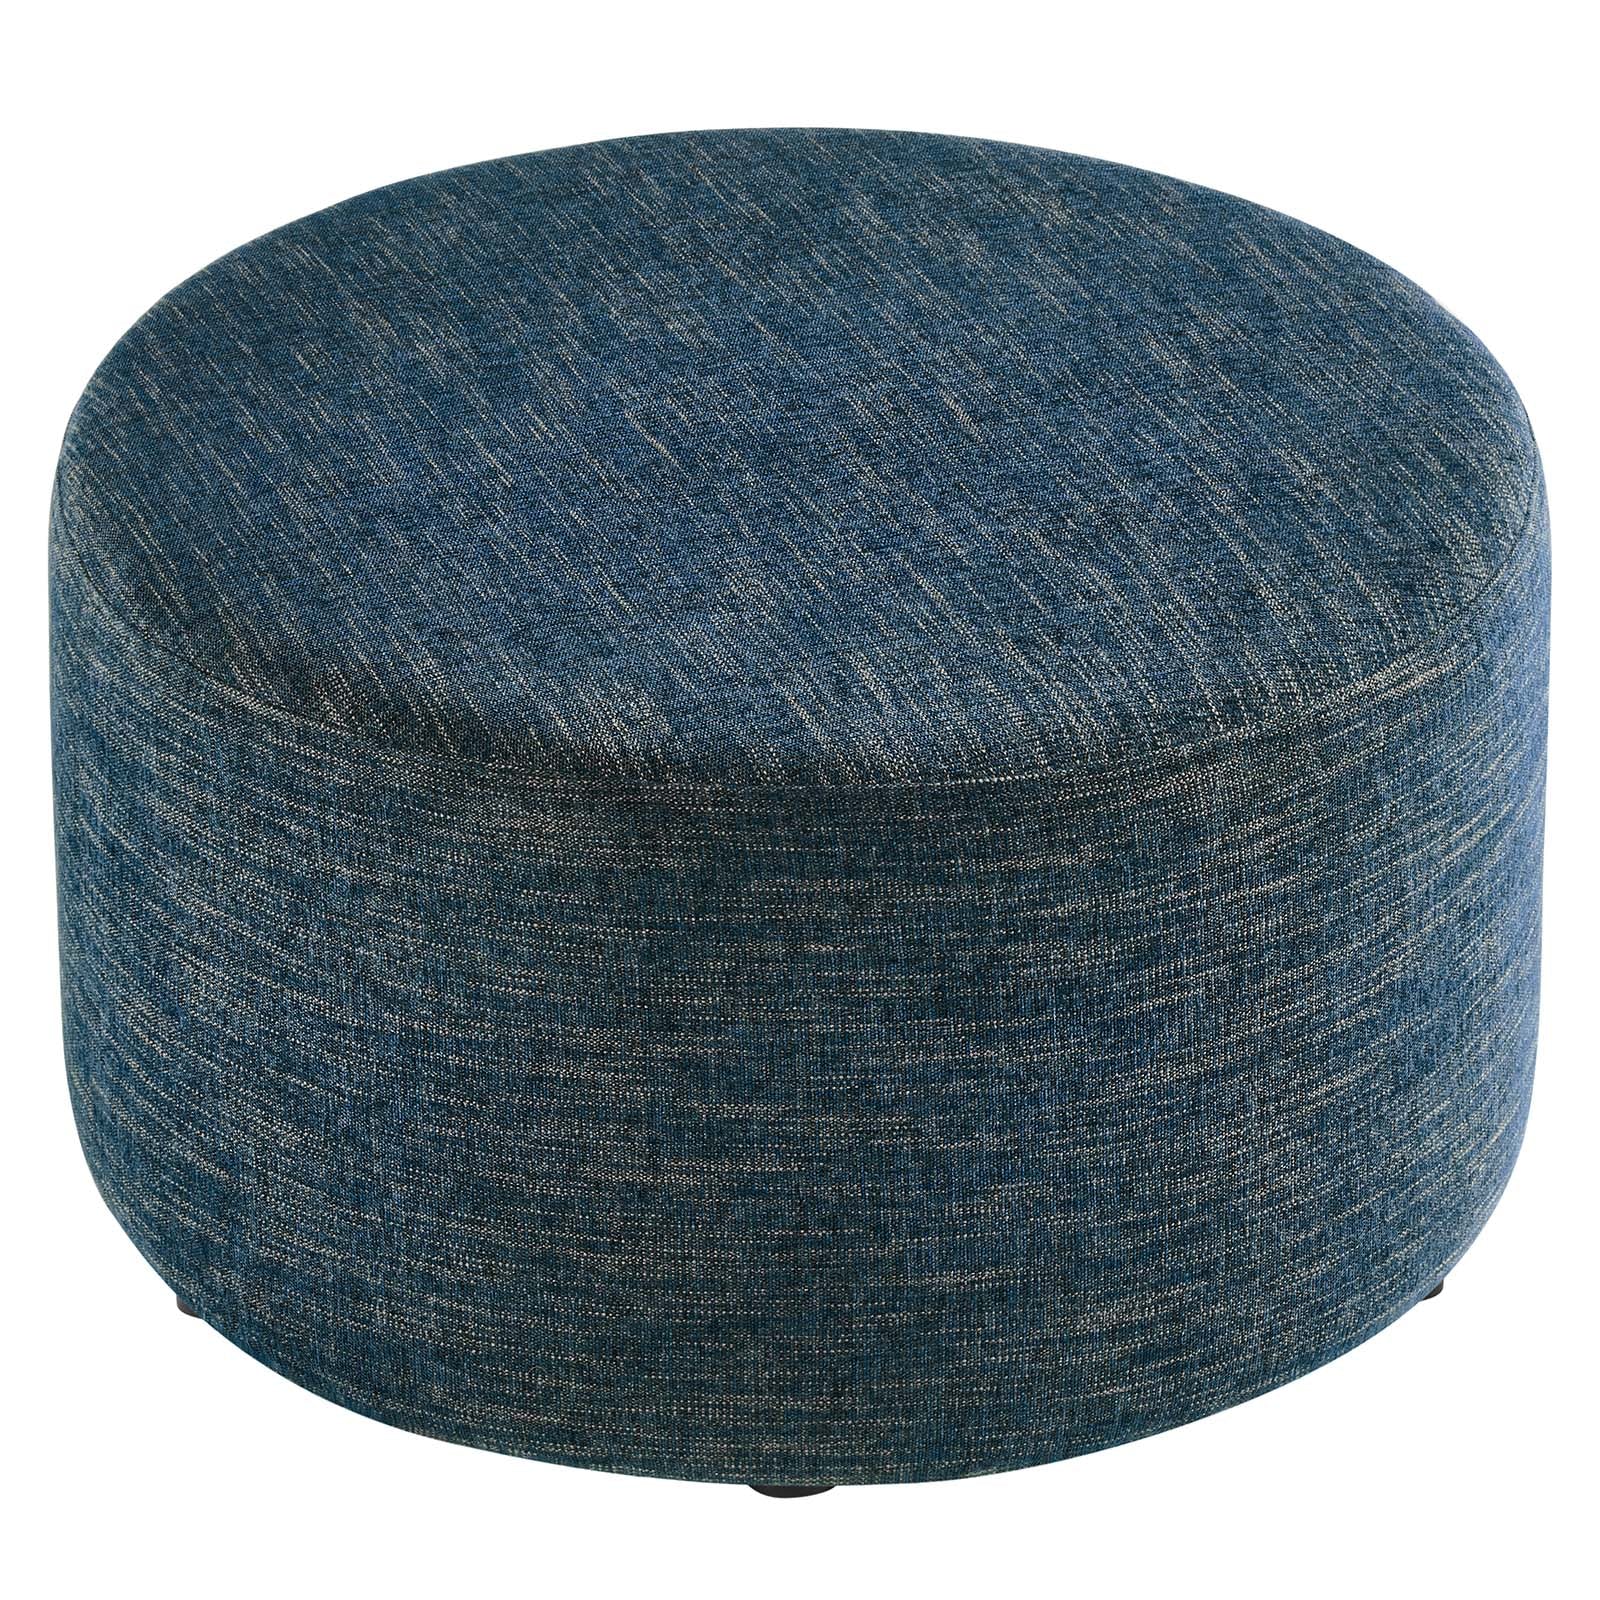 Callum Large 29" Round Woven Heathered Fabric Upholstered Ottoman - East Shore Modern Home Furnishings